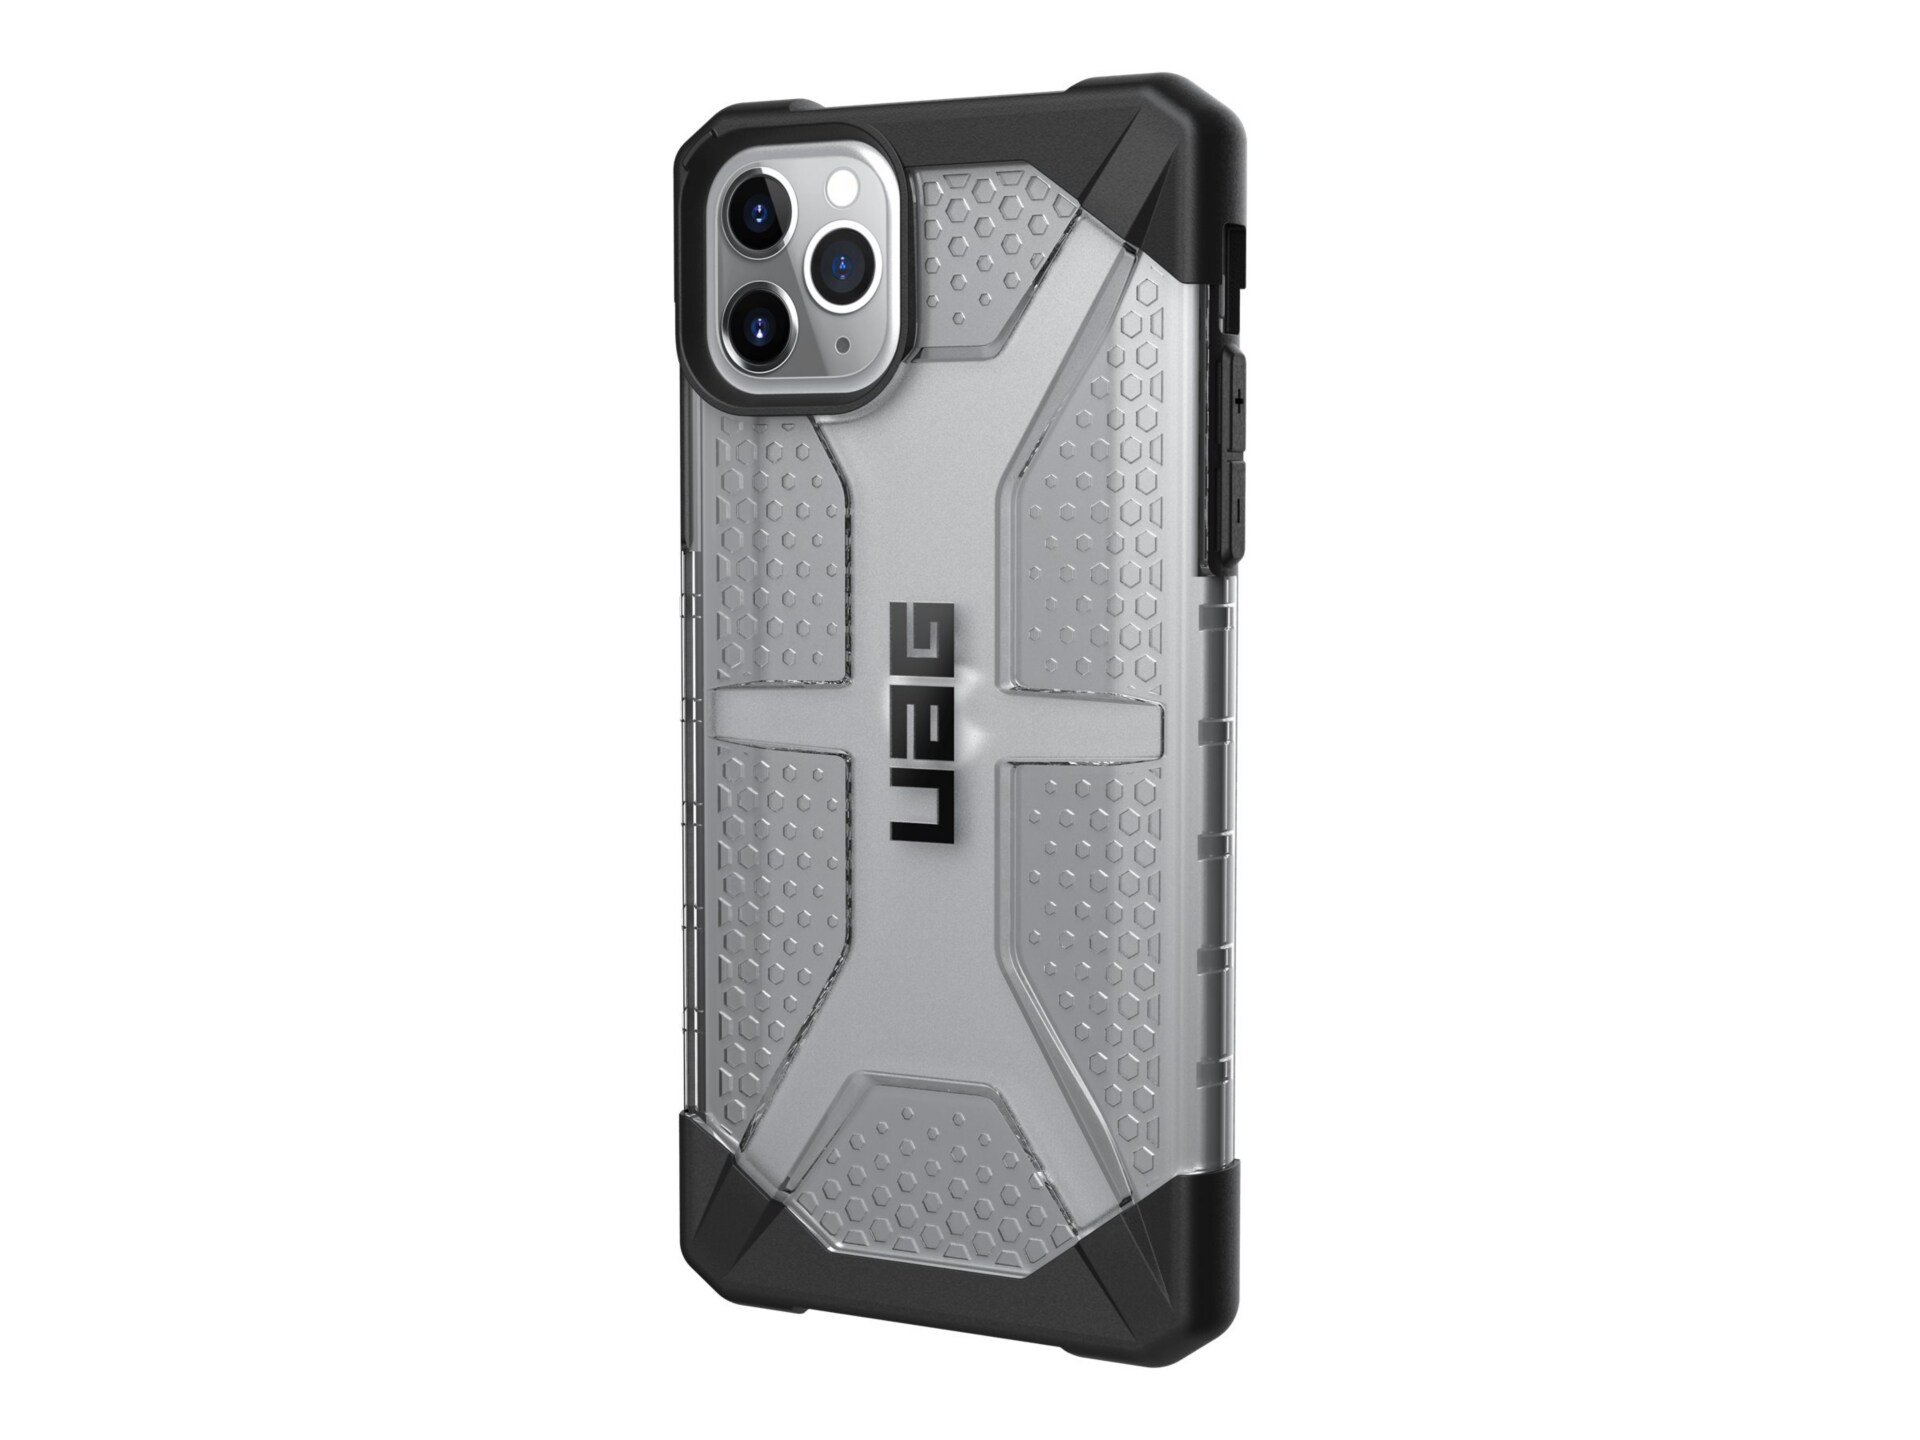 Uag Rugged Case For Iphone 11 Pro Max 6 5 Inch Screen Plasma Ice Back Cell Phones Accessories Cdw Com